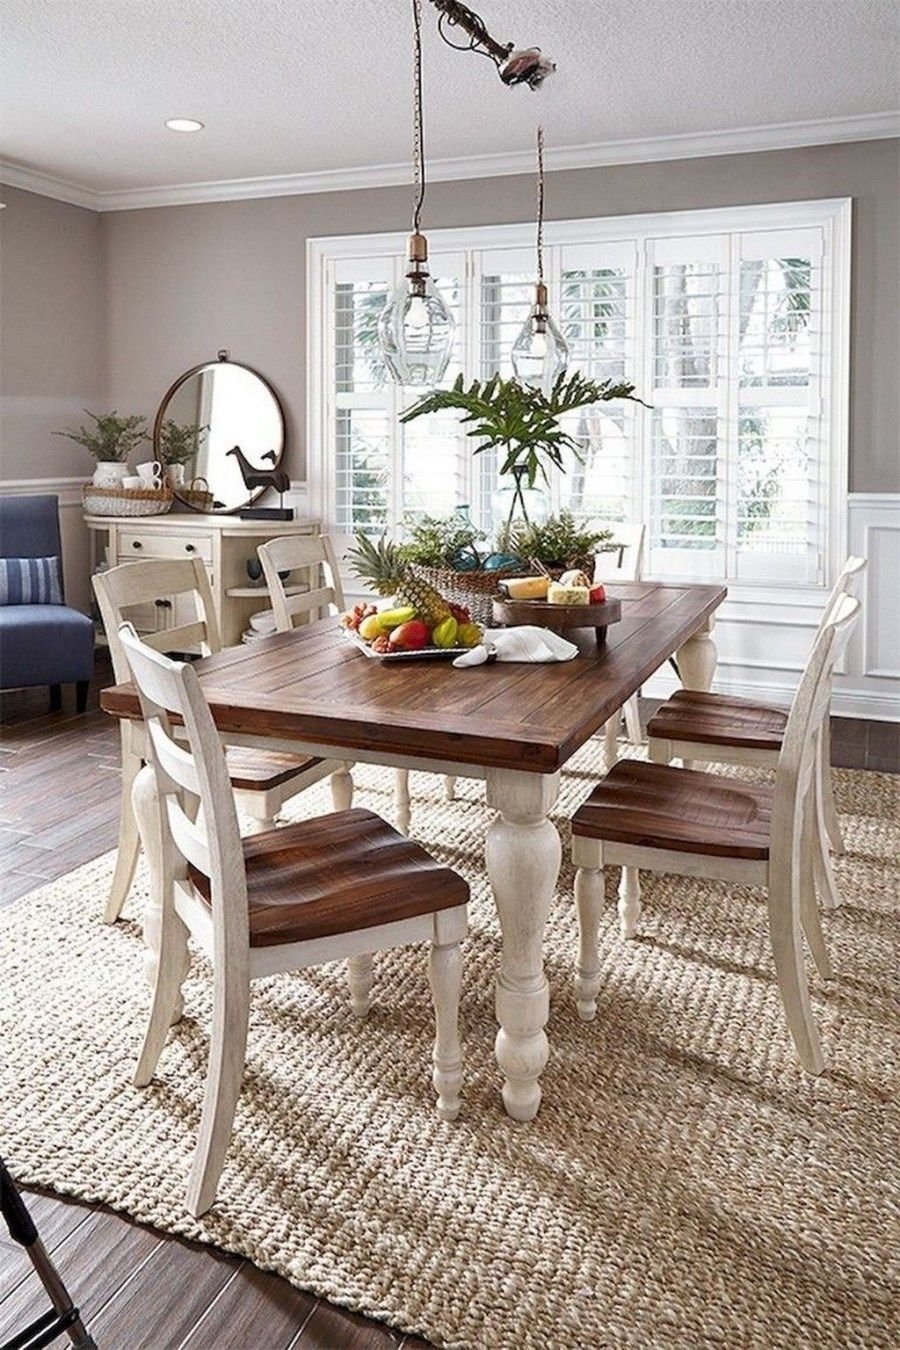 Dining room round table